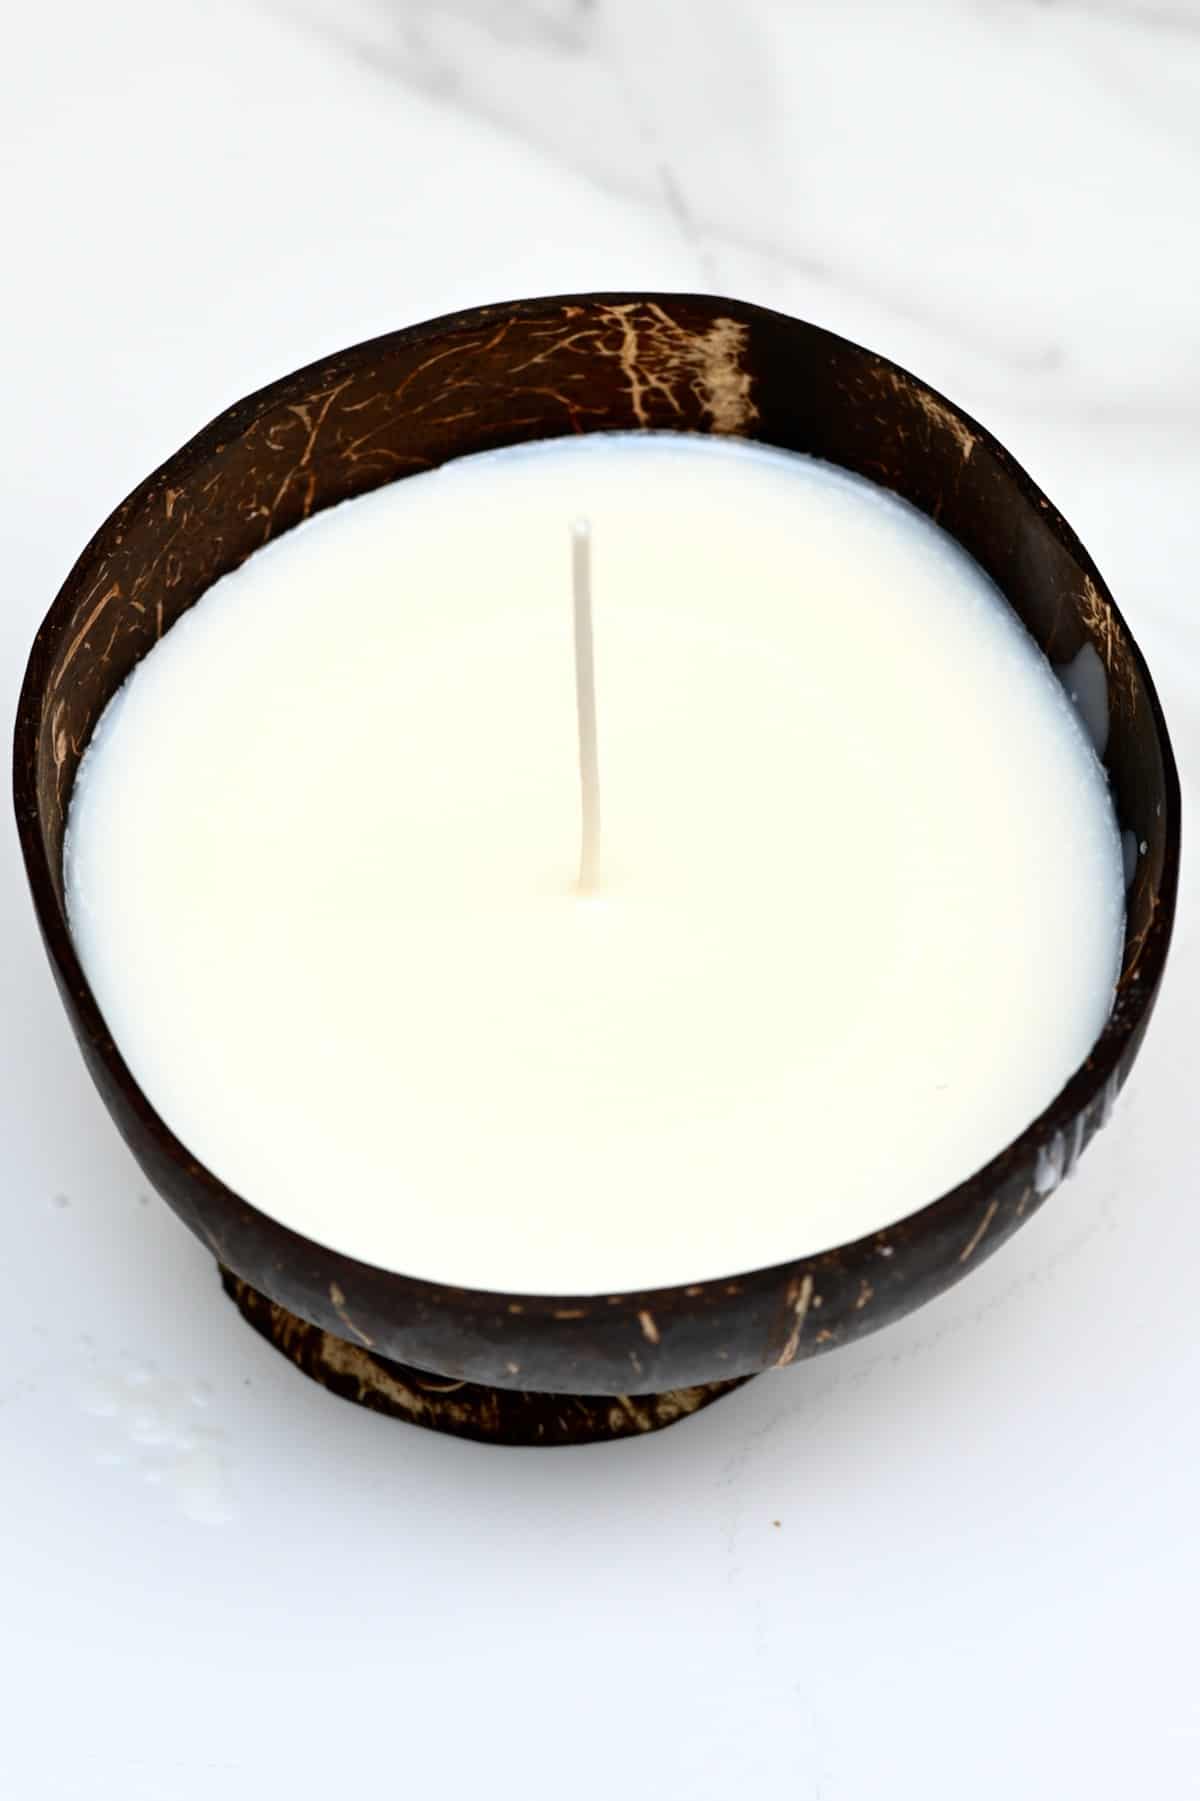 https://www.alphafoodie.com/wp-content/uploads/2021/05/How-to-make-candles-Main2.jpeg